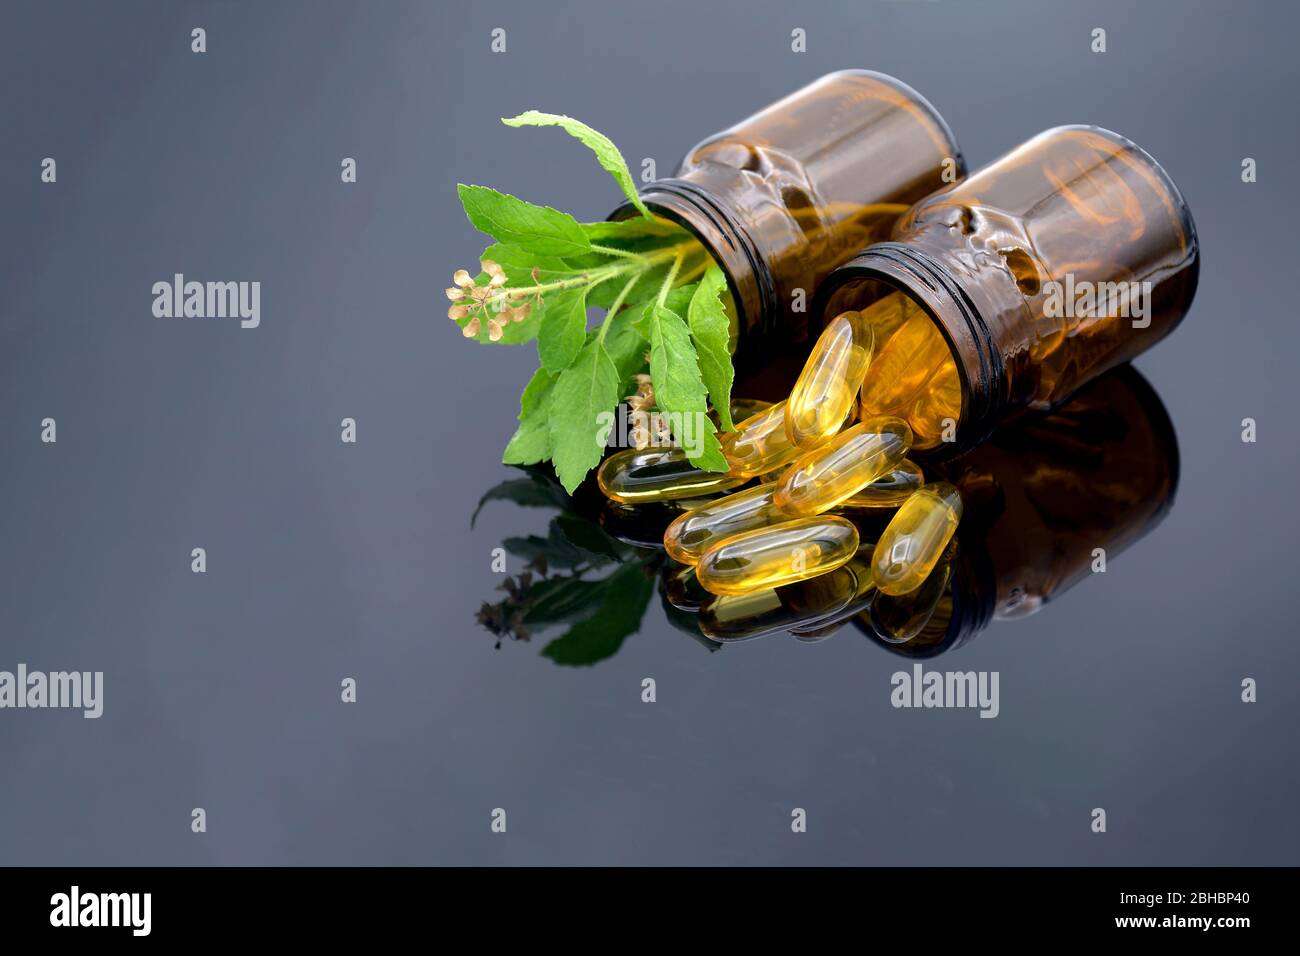 Oil in capsule, amber bottle and fresh herbs on dark background in traditional medicine concept. Stock Photo